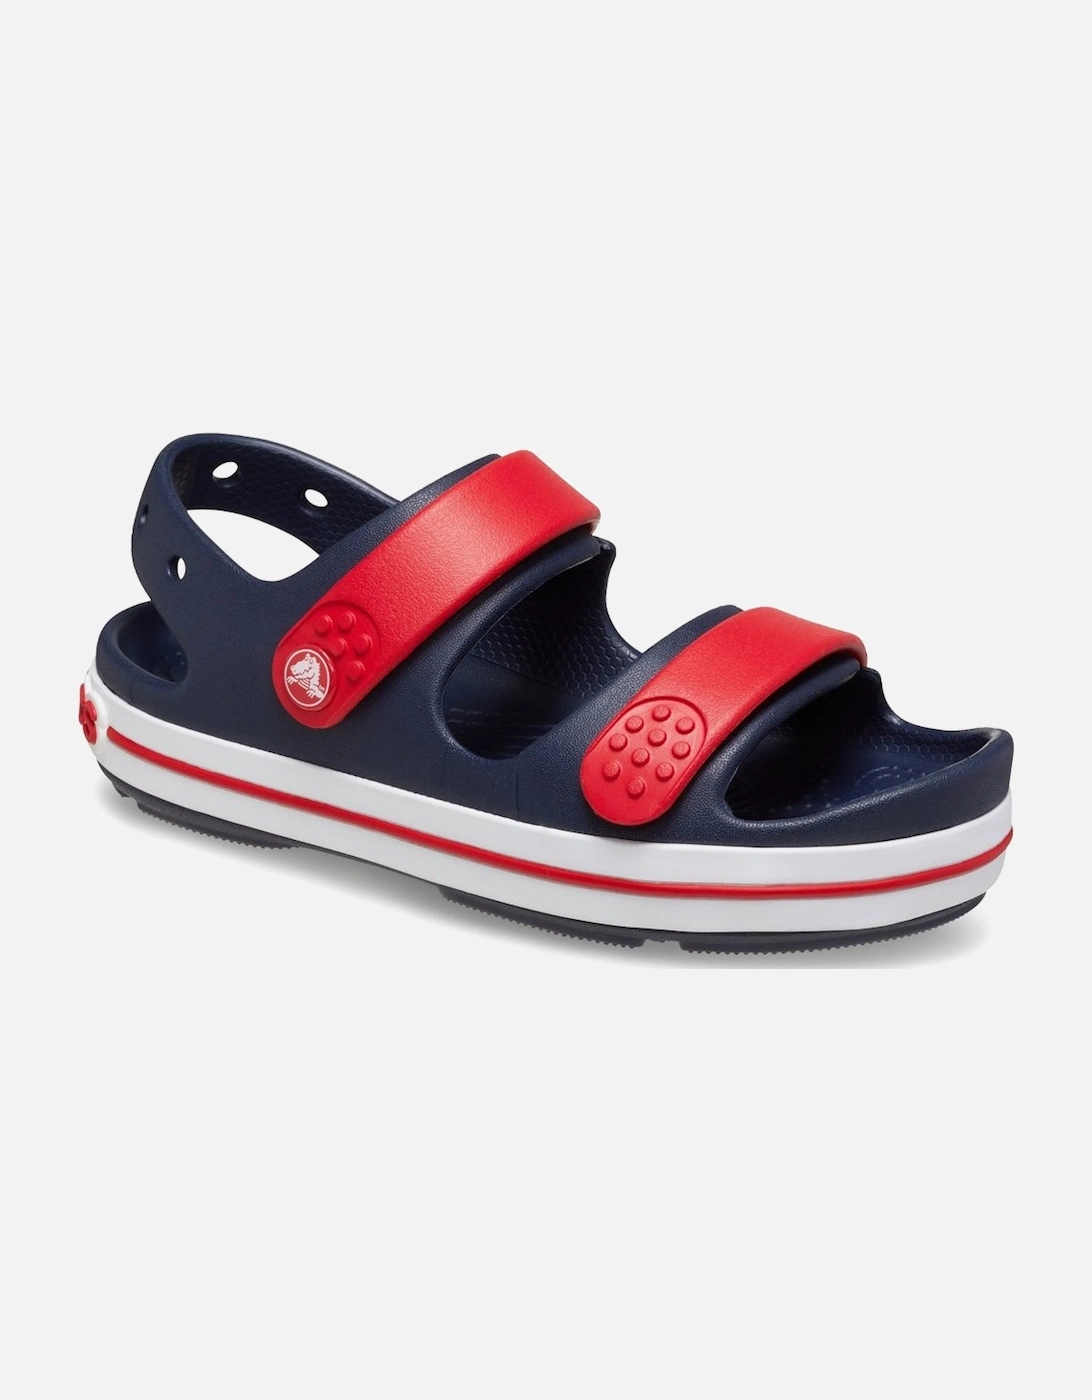 Crocband Play Boys Sandals, 7 of 6